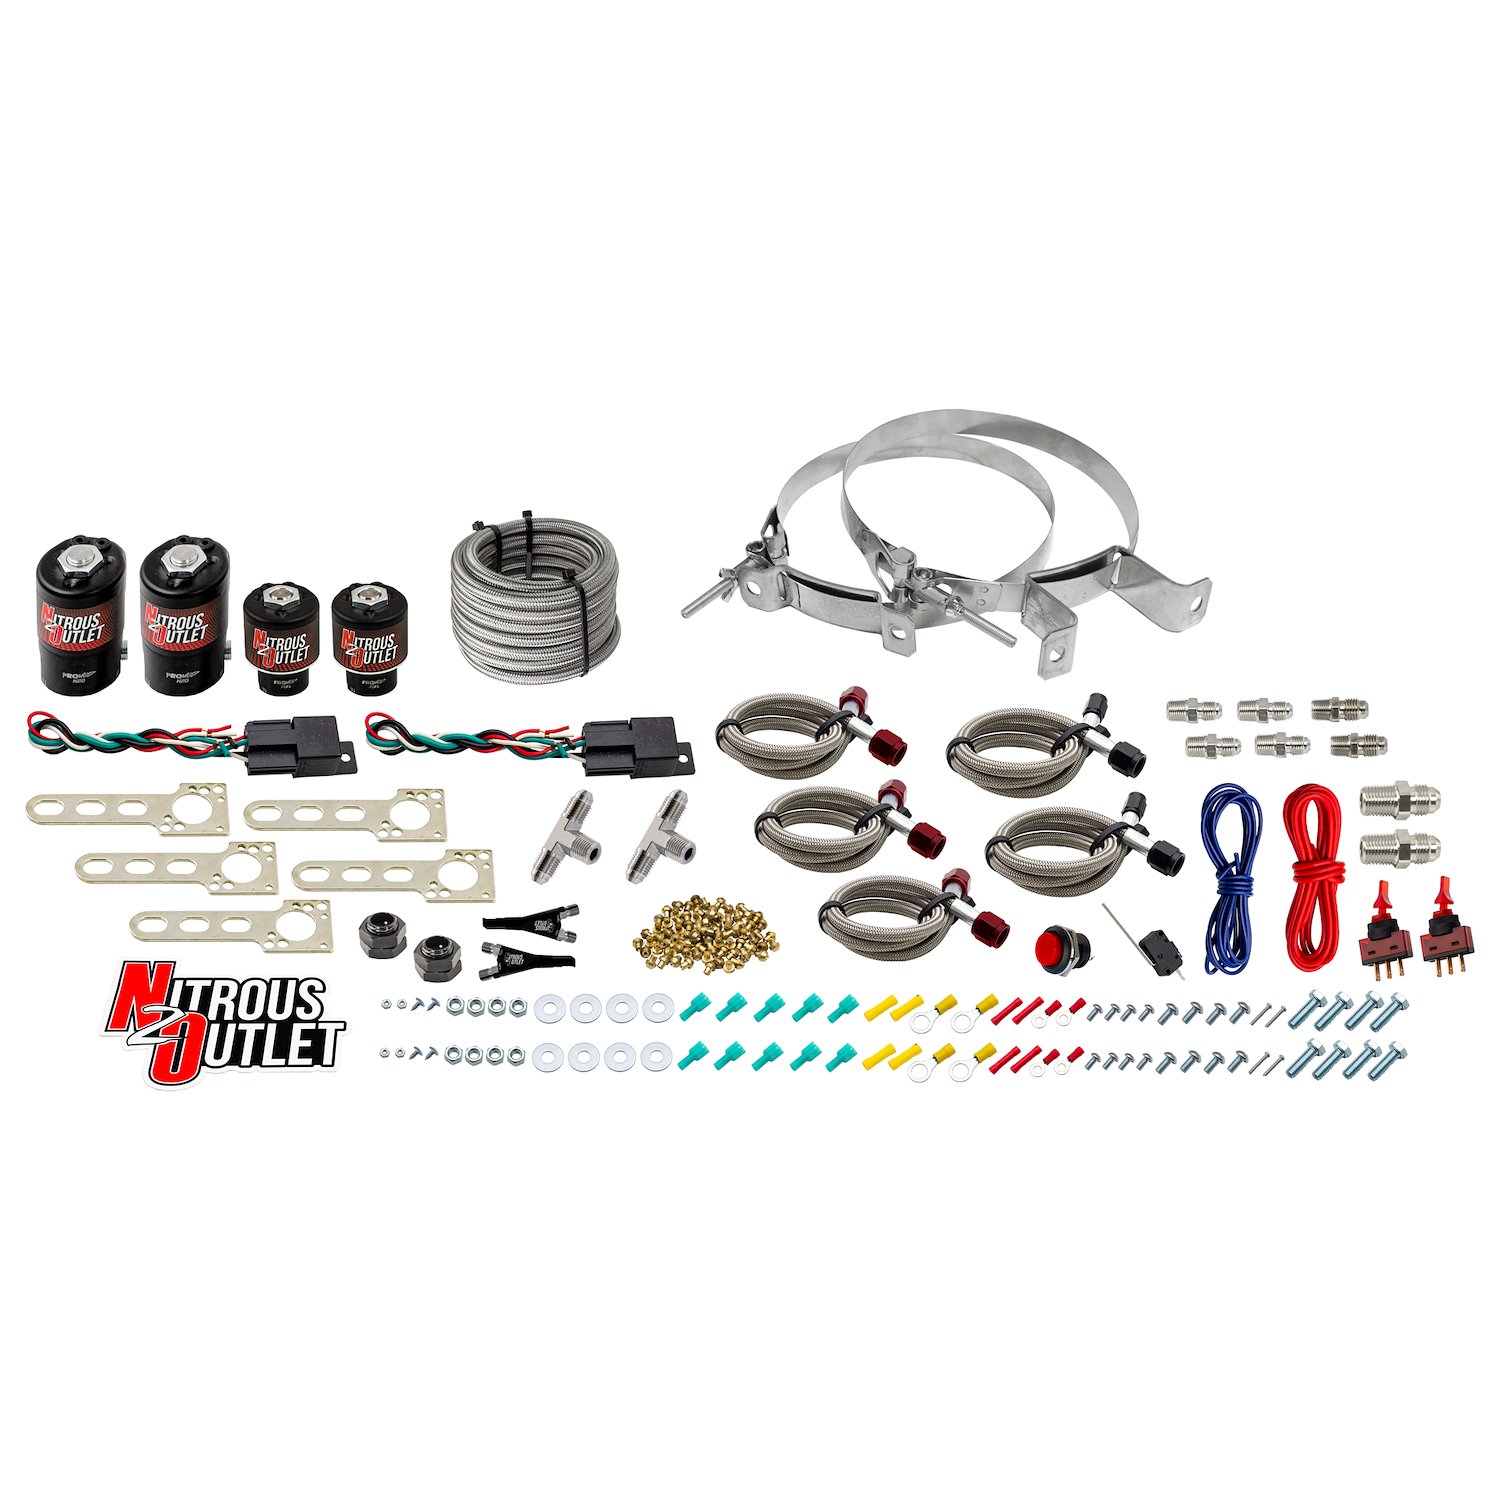 00-10033-00 Import EFI Dual-Stage Single-Nozzle System, Gas/E85, 5-55psi, 35-200HP, No Bottle